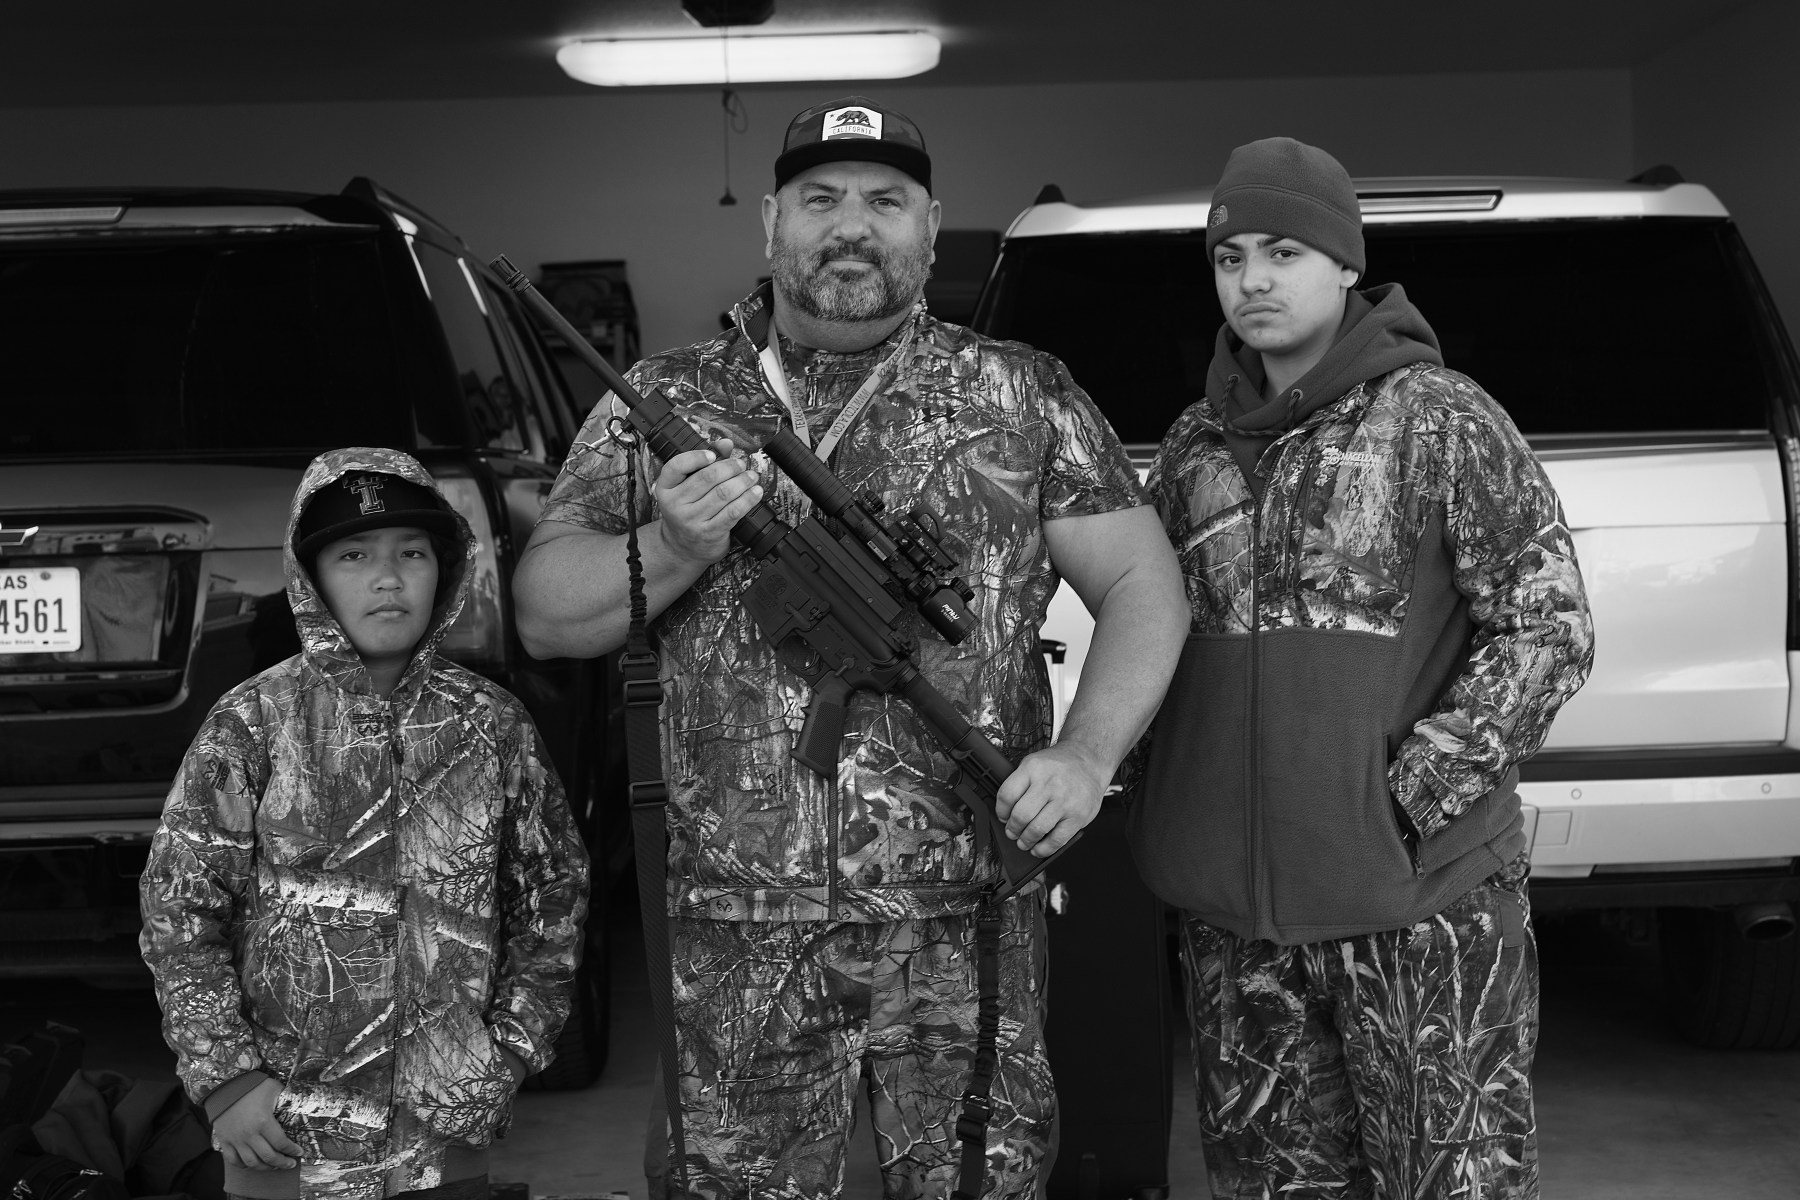 Brian Chavez (center) with his MP15, is flanked by his nine-year-old godson and nephew, Fernando Chavez (left), and his 15-year-old stepson, Kade Ramos (right). <br><br>“I went out to see Brian and he was getting ready to go out hunting,” Clark says. “He went to Harvard and then University of Texas Law School and he's a super smart guy. I would say he's probably a good Democrat, but he's out there in the part of the world where, Democrat or not, you go hunting.”